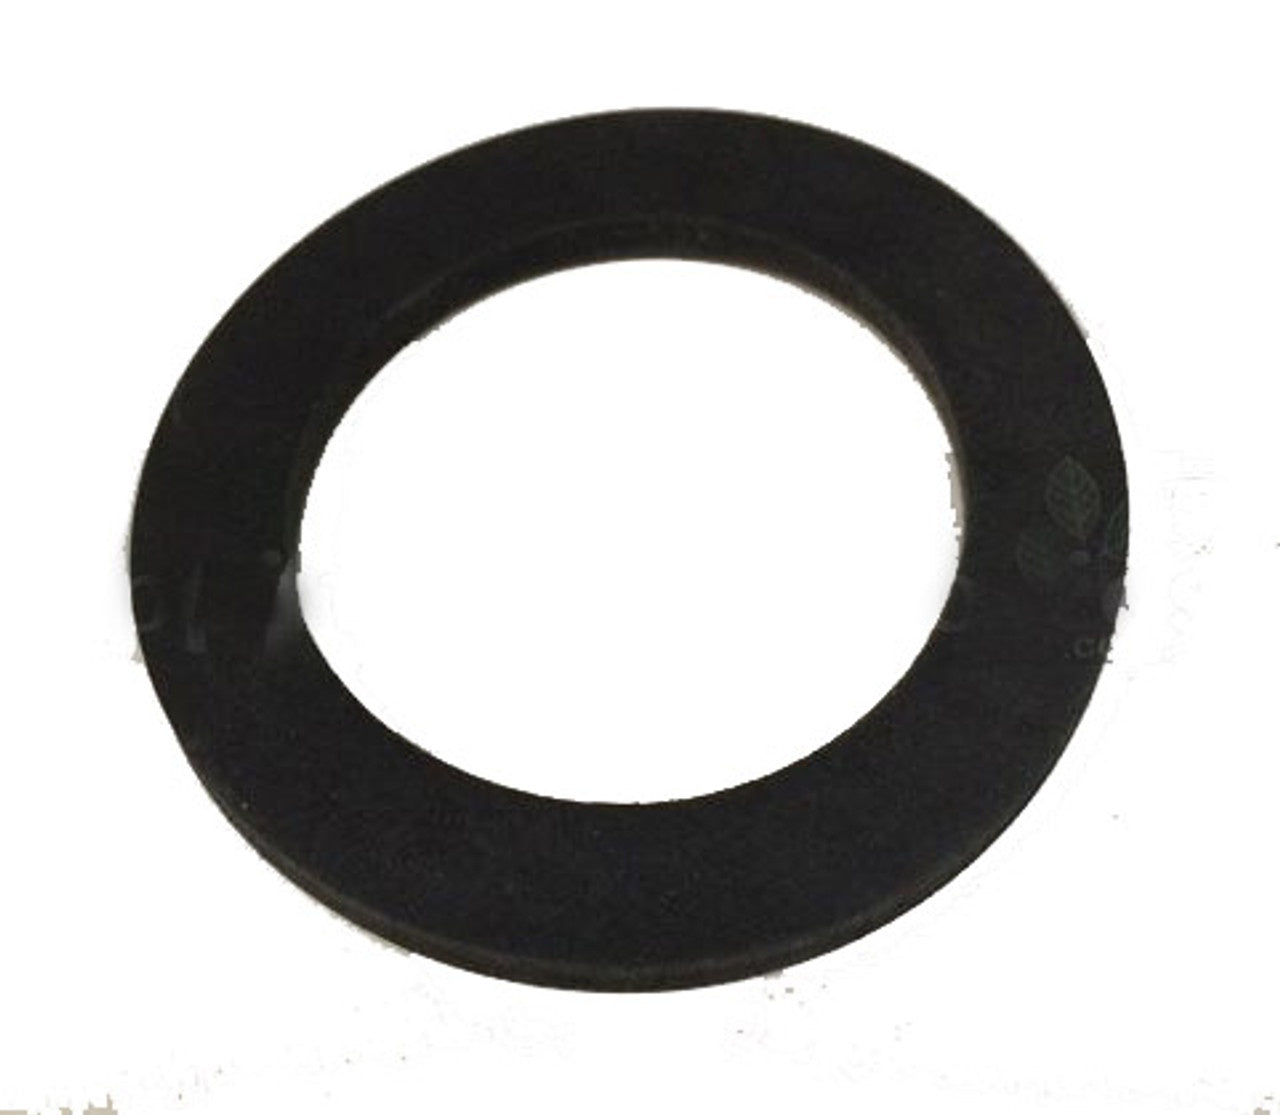 TUB OUTLET RUBBER WASHER